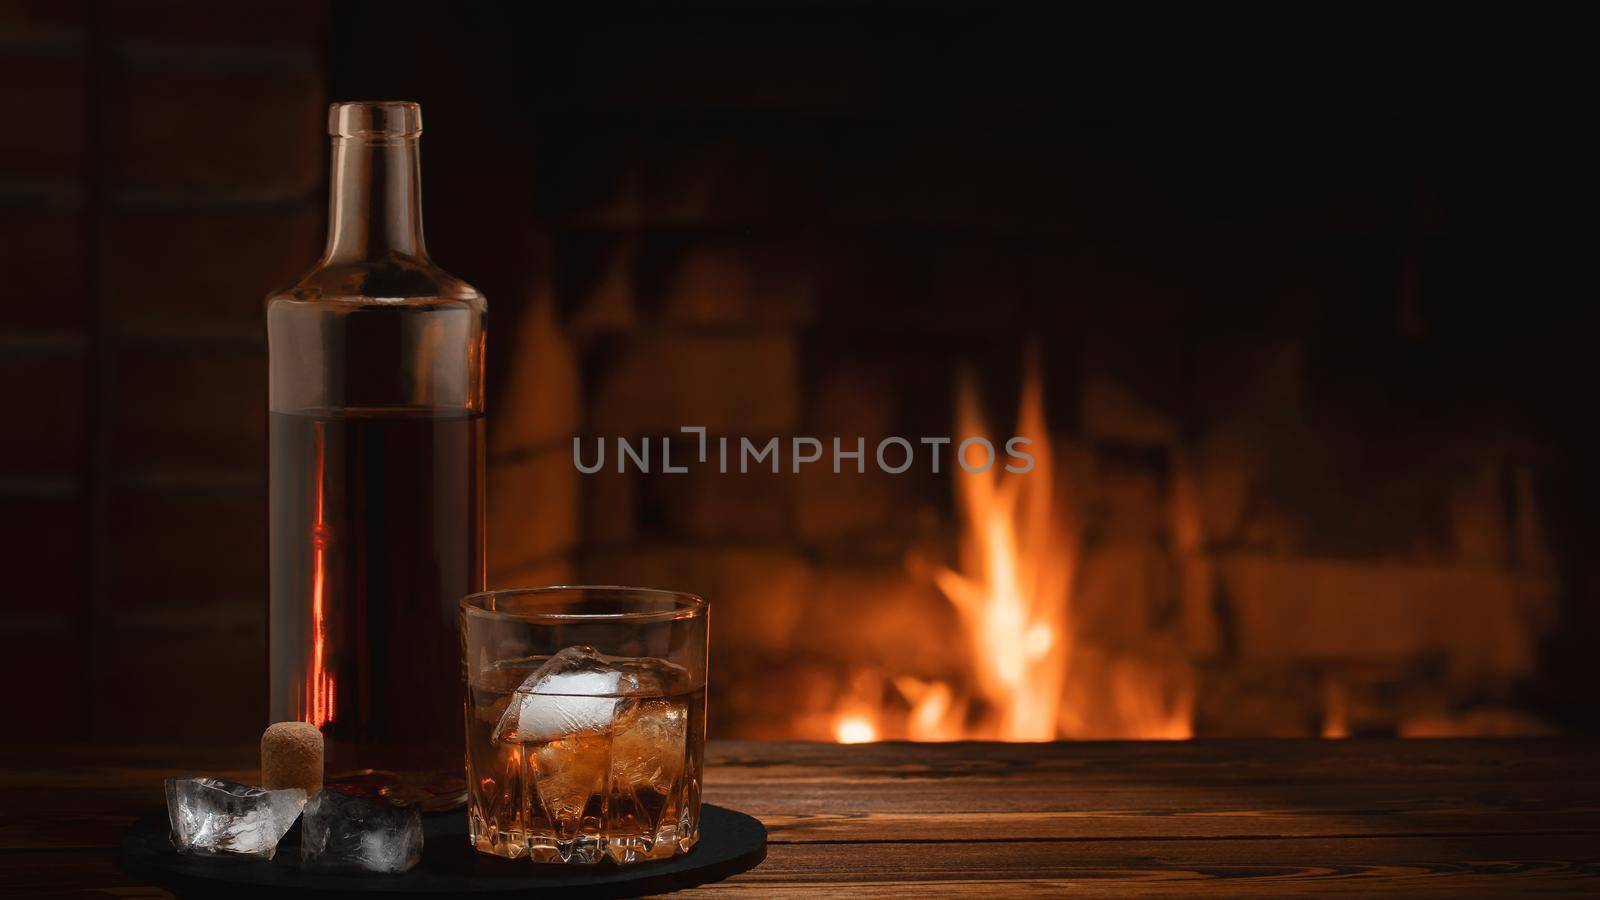 Bottle and glass of whiskey with ice on the table near the burning fireplace. Rest and relaxation concept by galsand